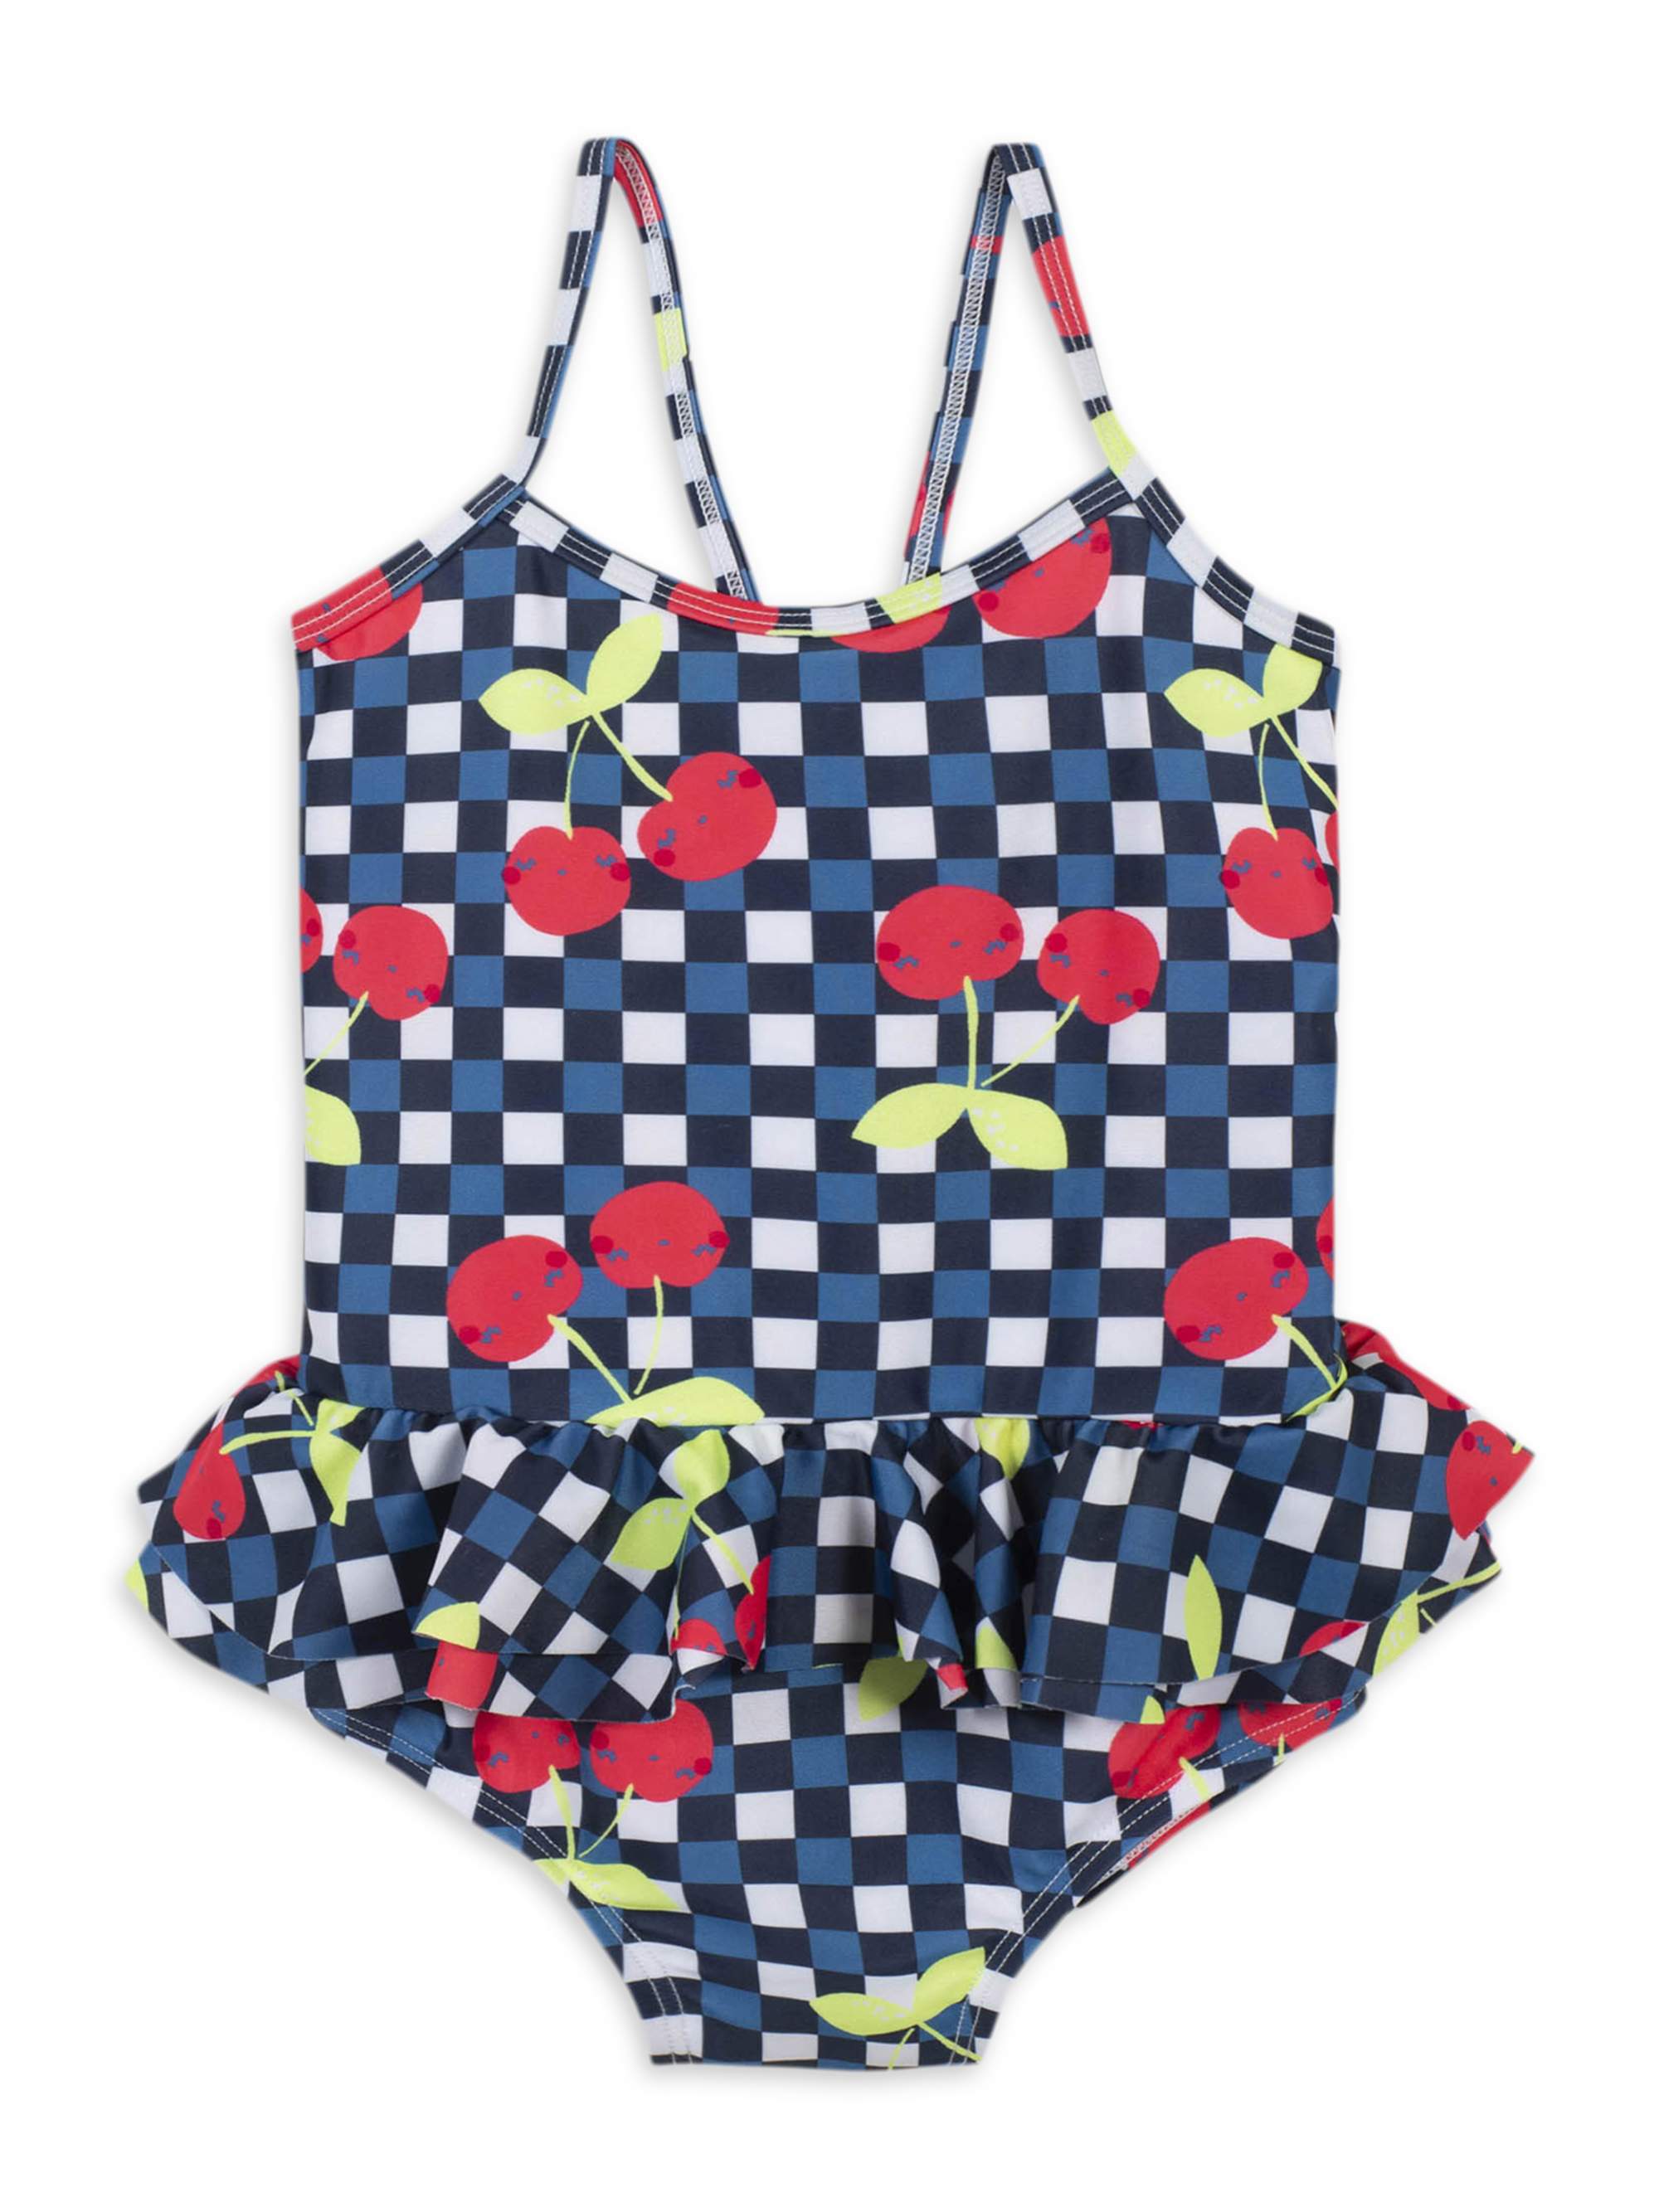 Gerber Baby Toddler Girl One-Piece Swimsuit - image 1 of 7